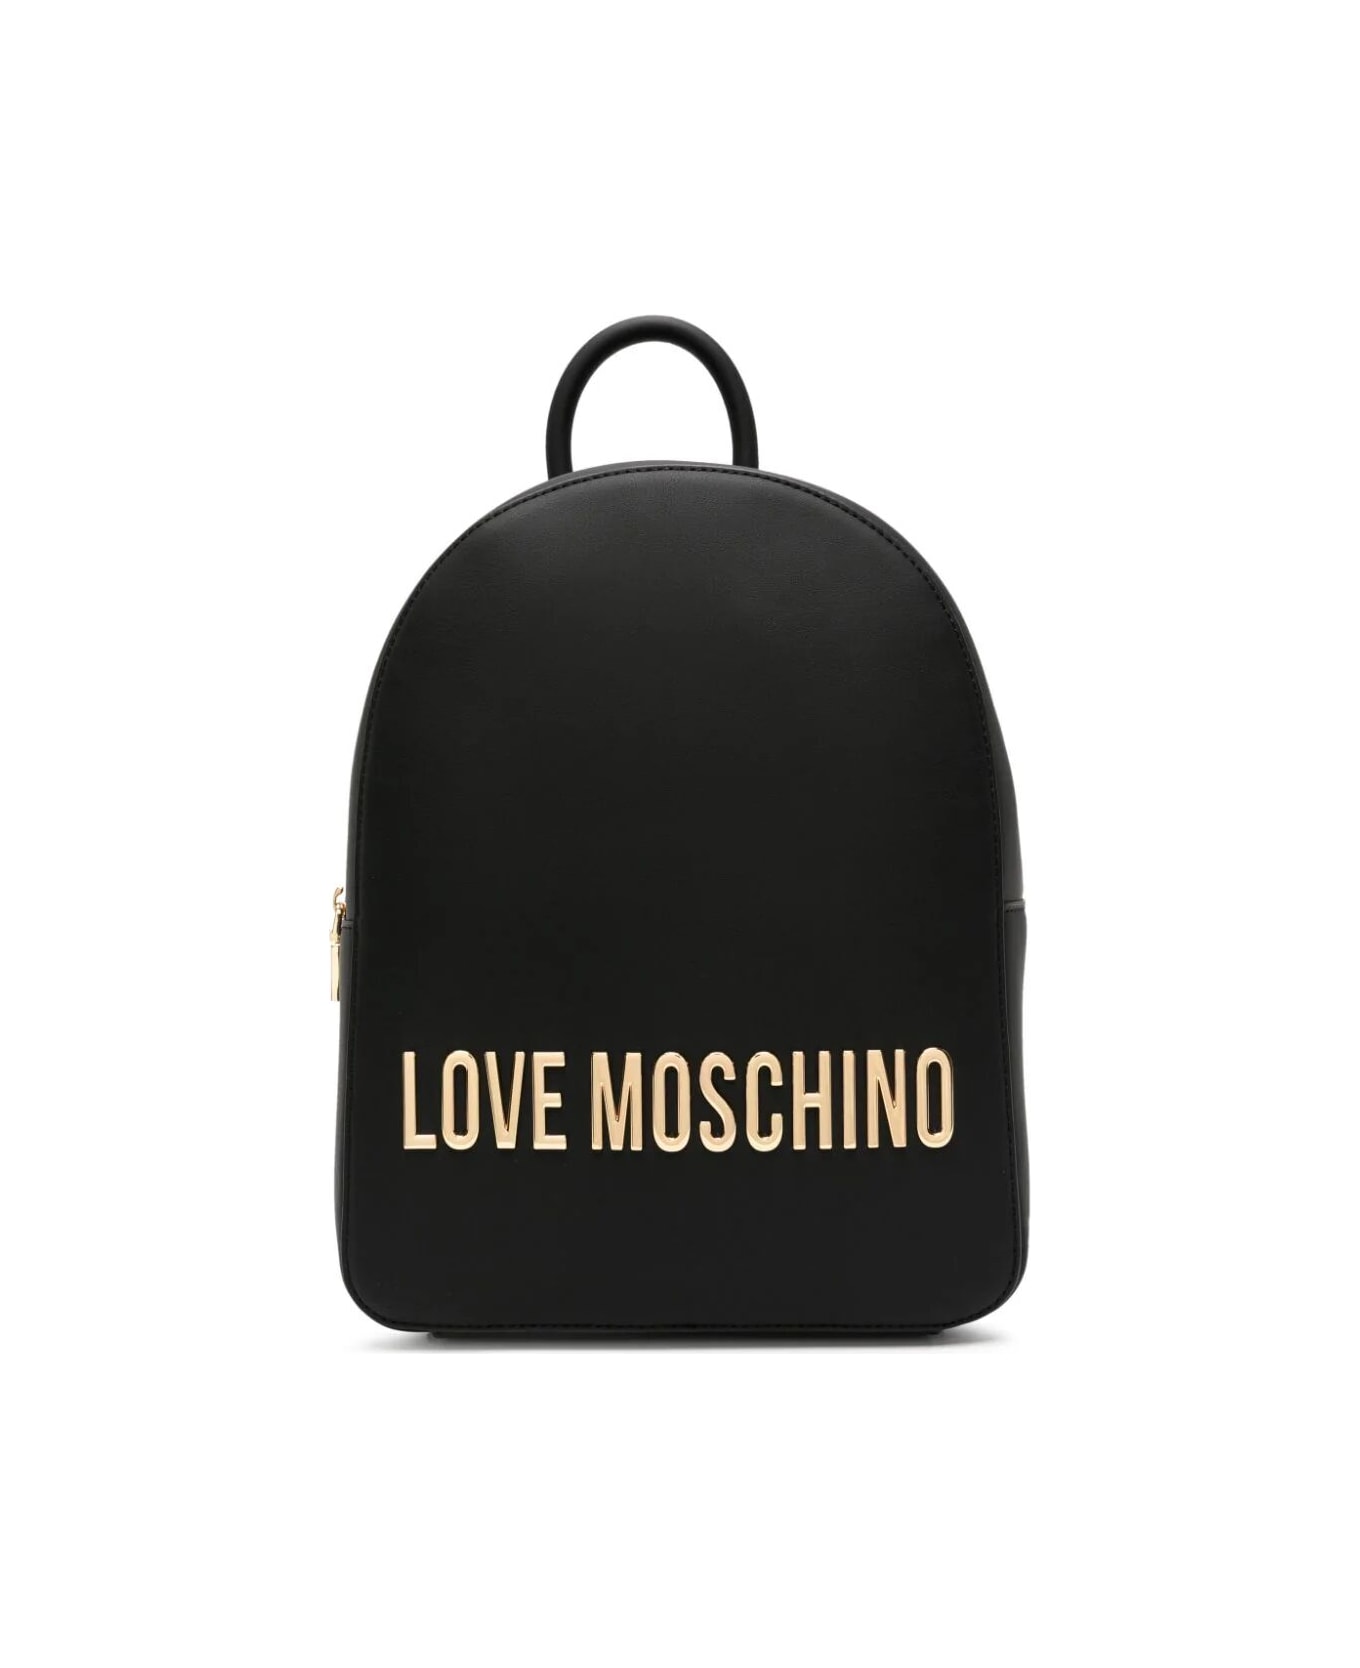 Love Moschino Backpack - Black バックパック